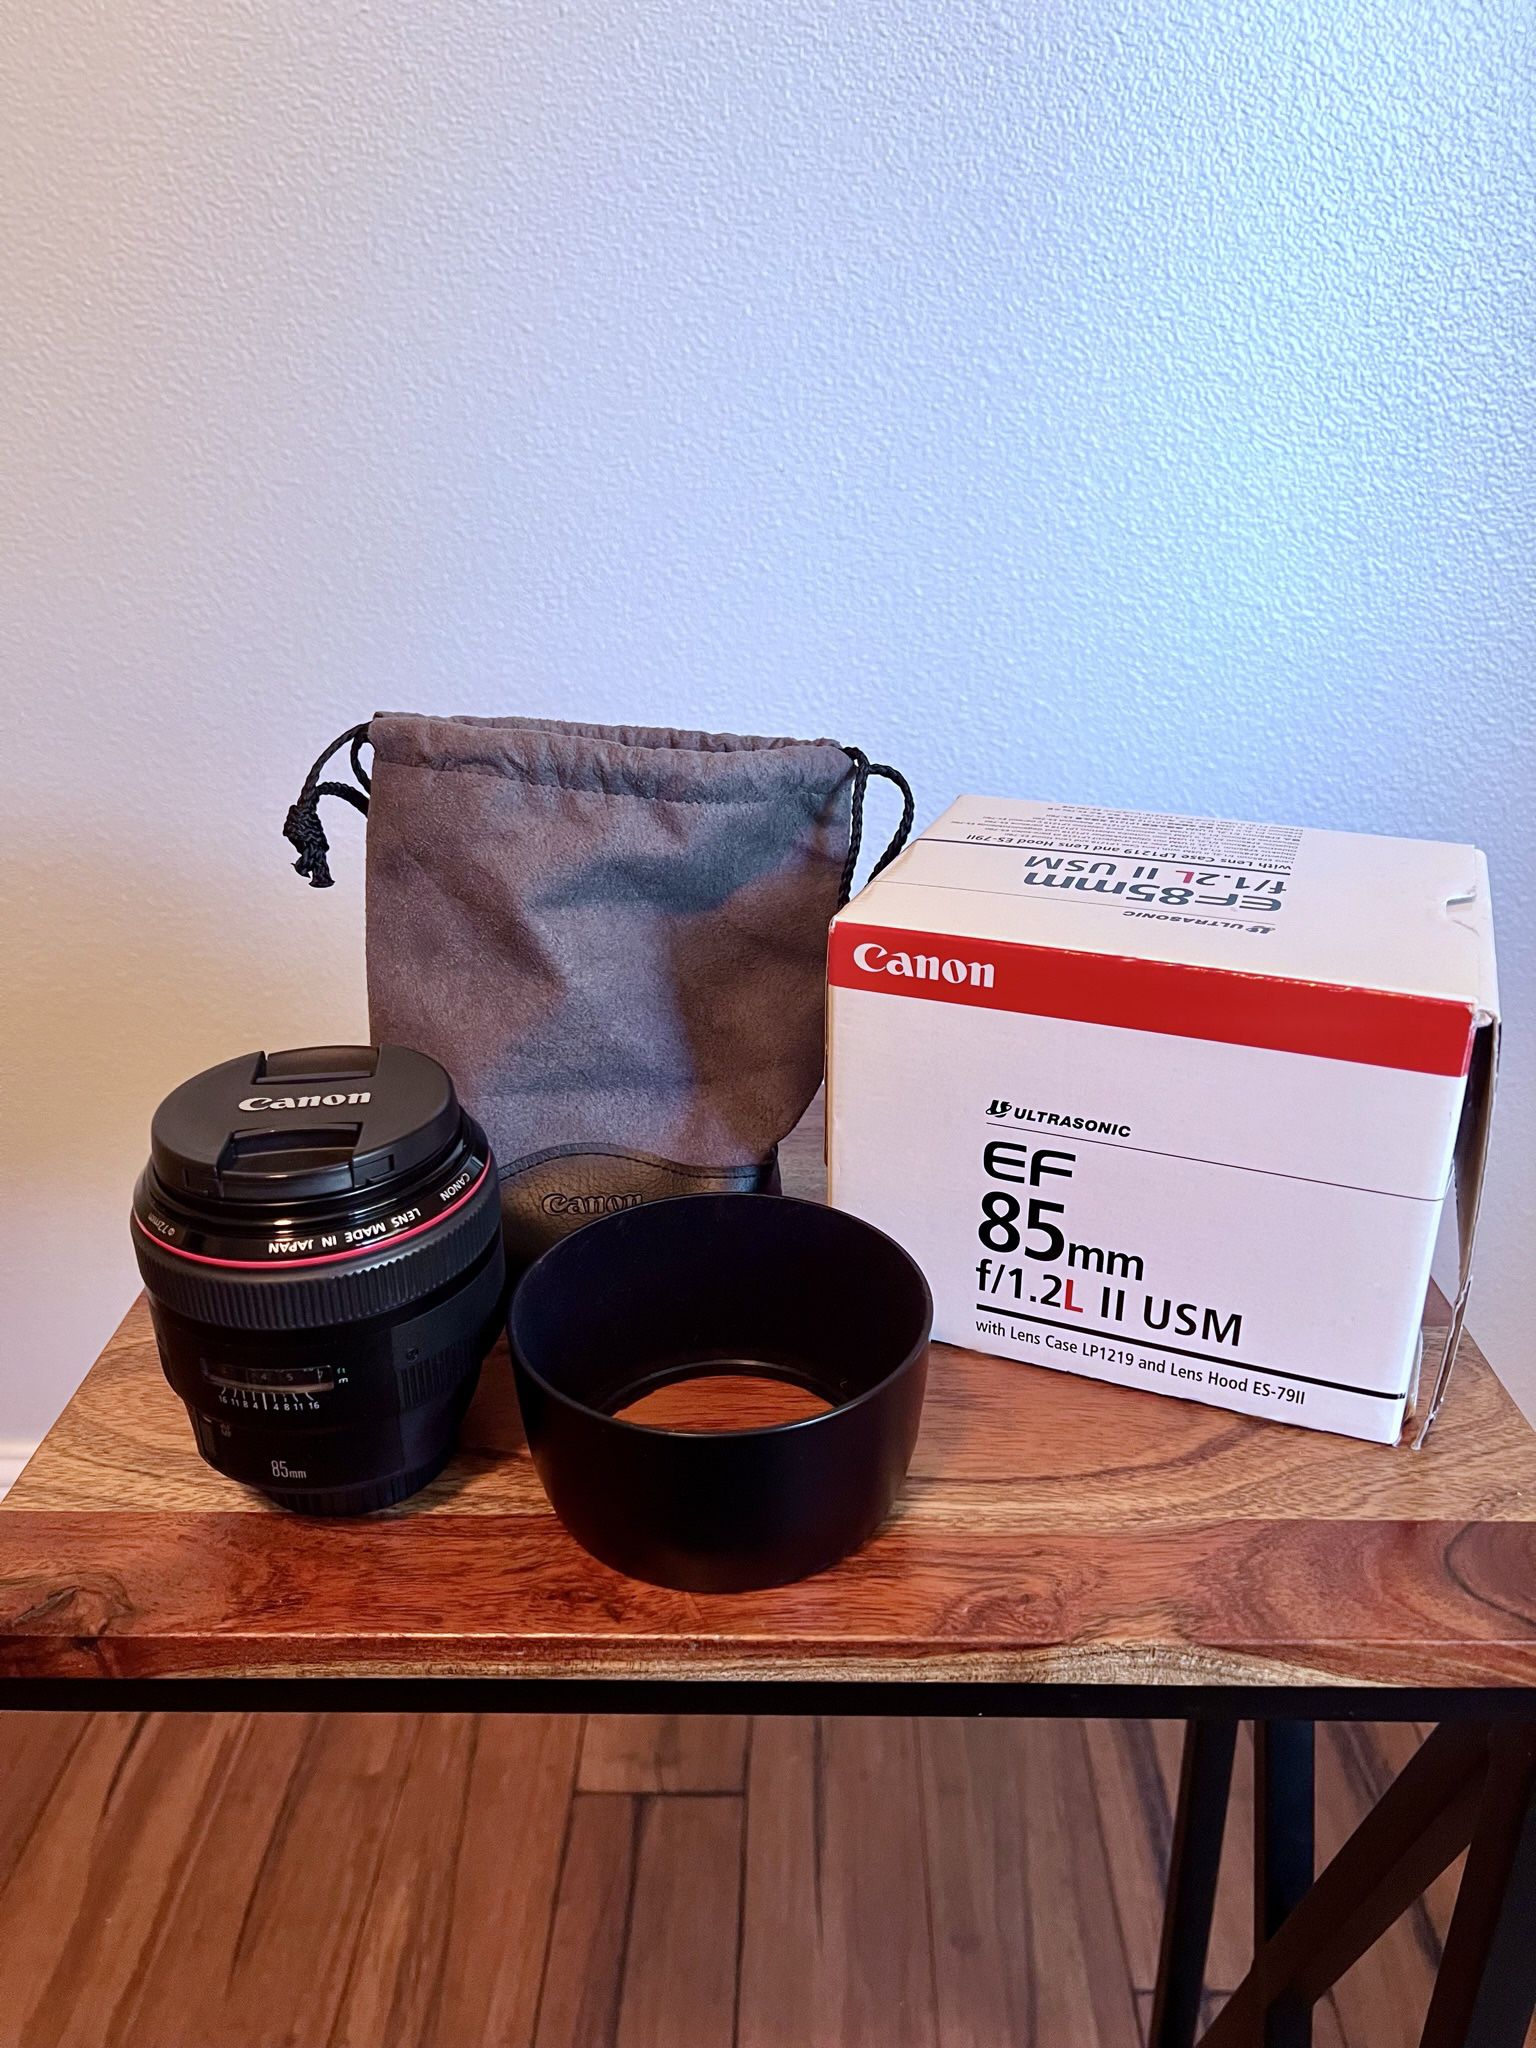 Canon EF 85mm f/1.2L II USM - Offers Welcome